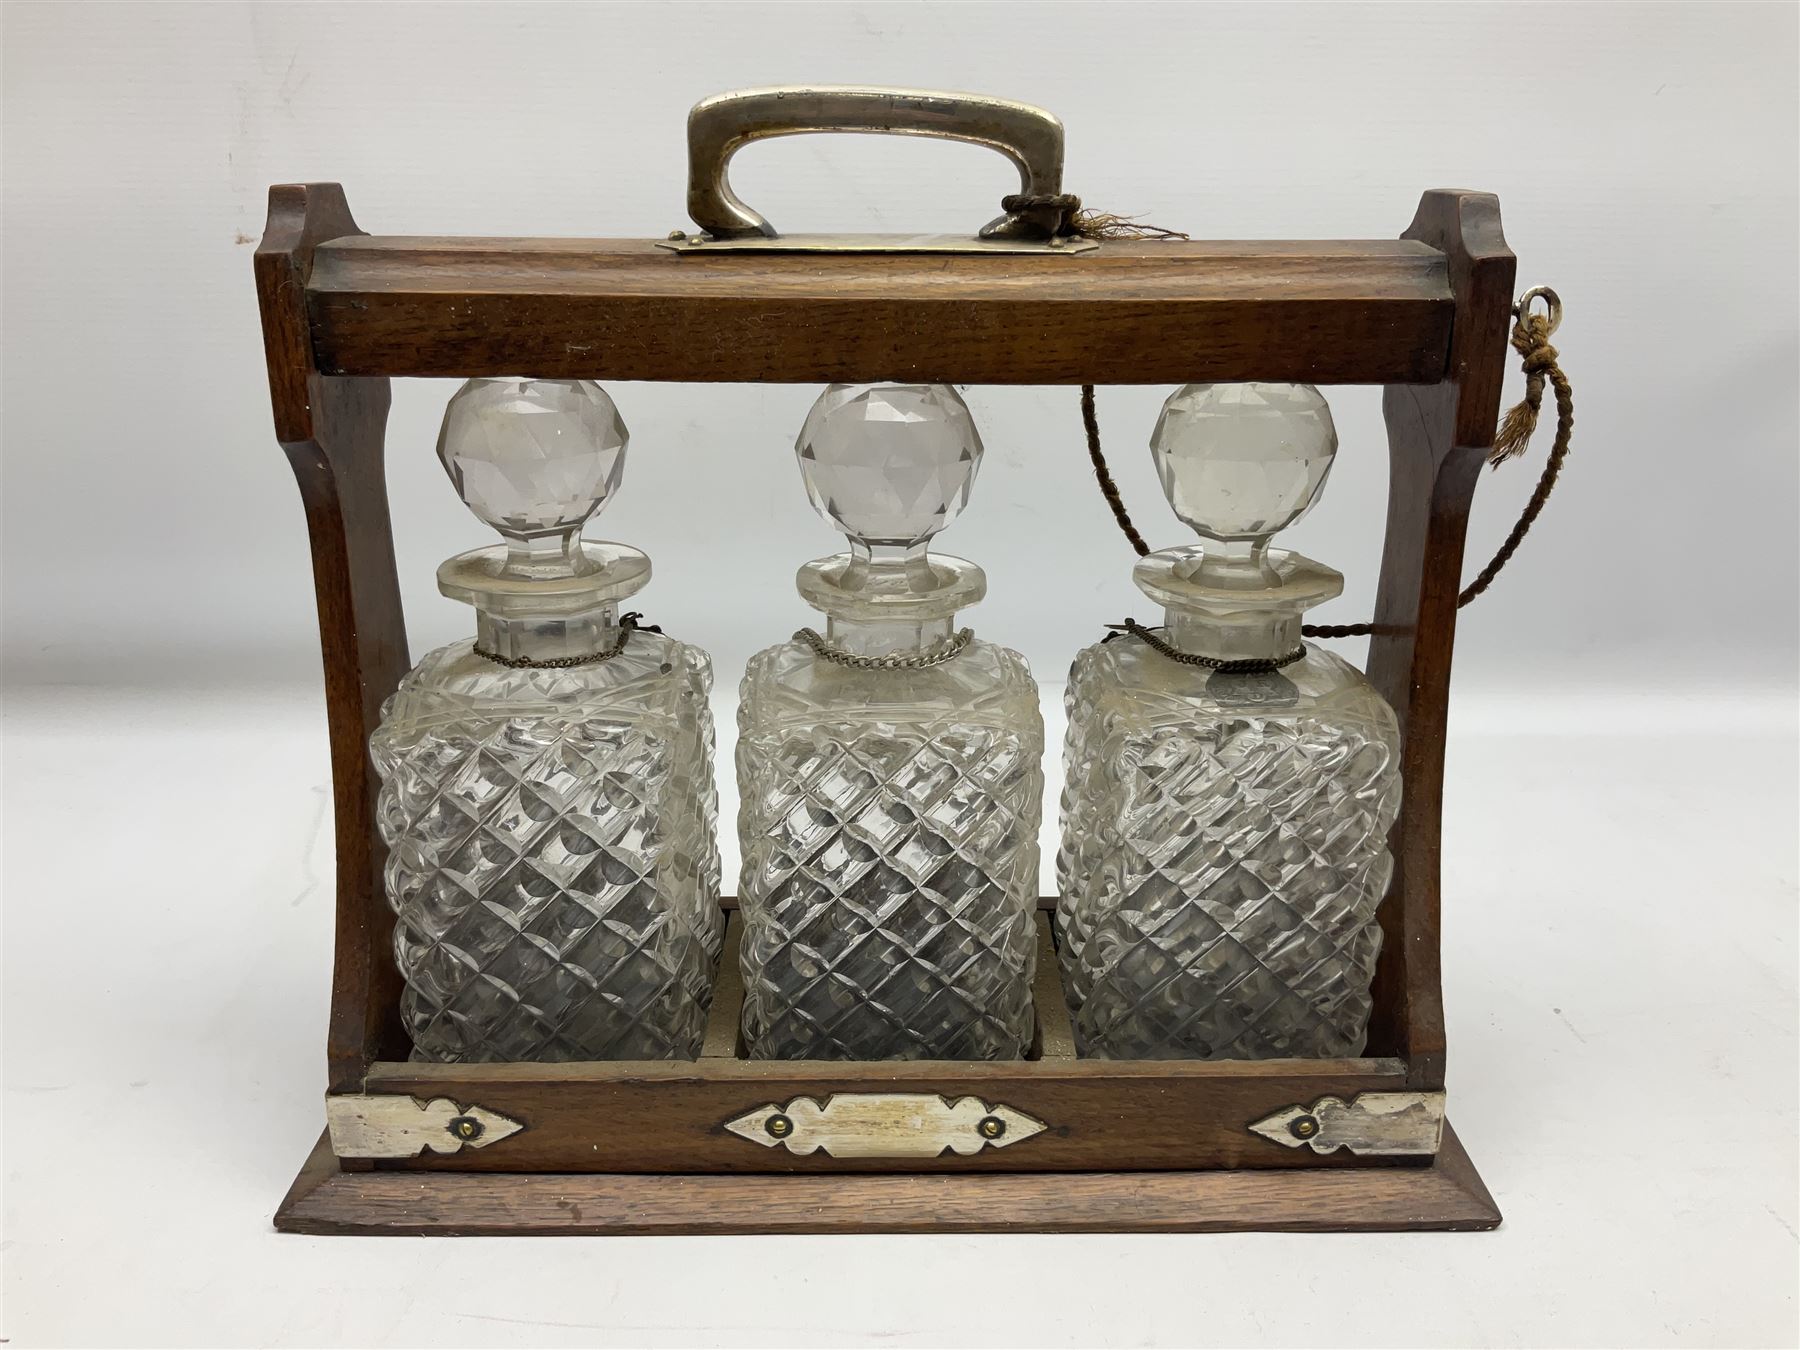 Edwardian oak tantalus with silver plated mounts with three square sided glass decanters - Image 8 of 8